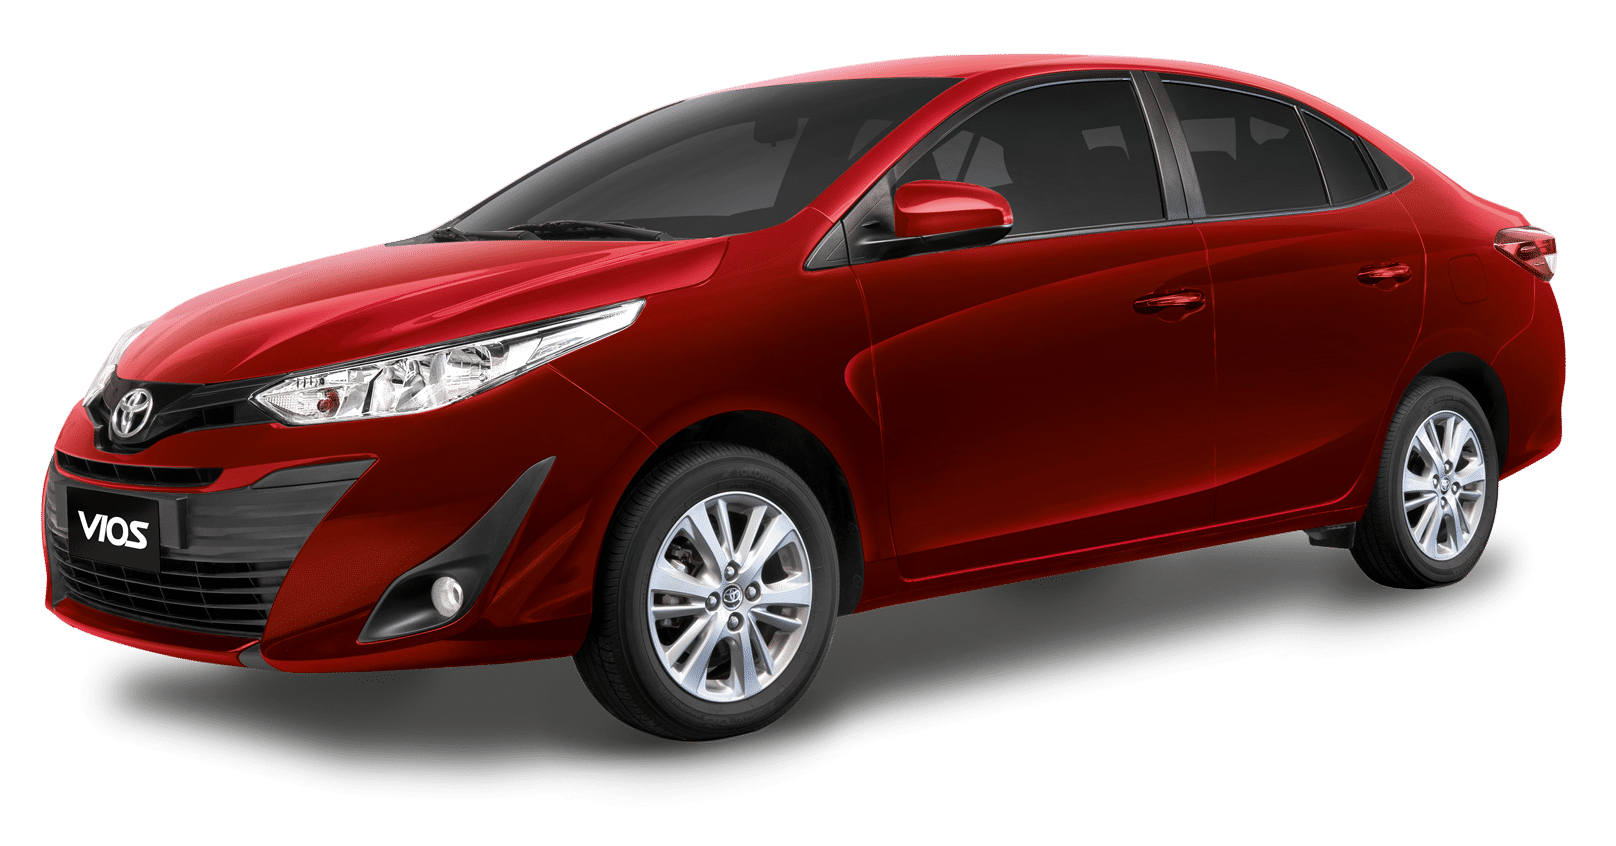 Toyota strengthens Vios with latest variant